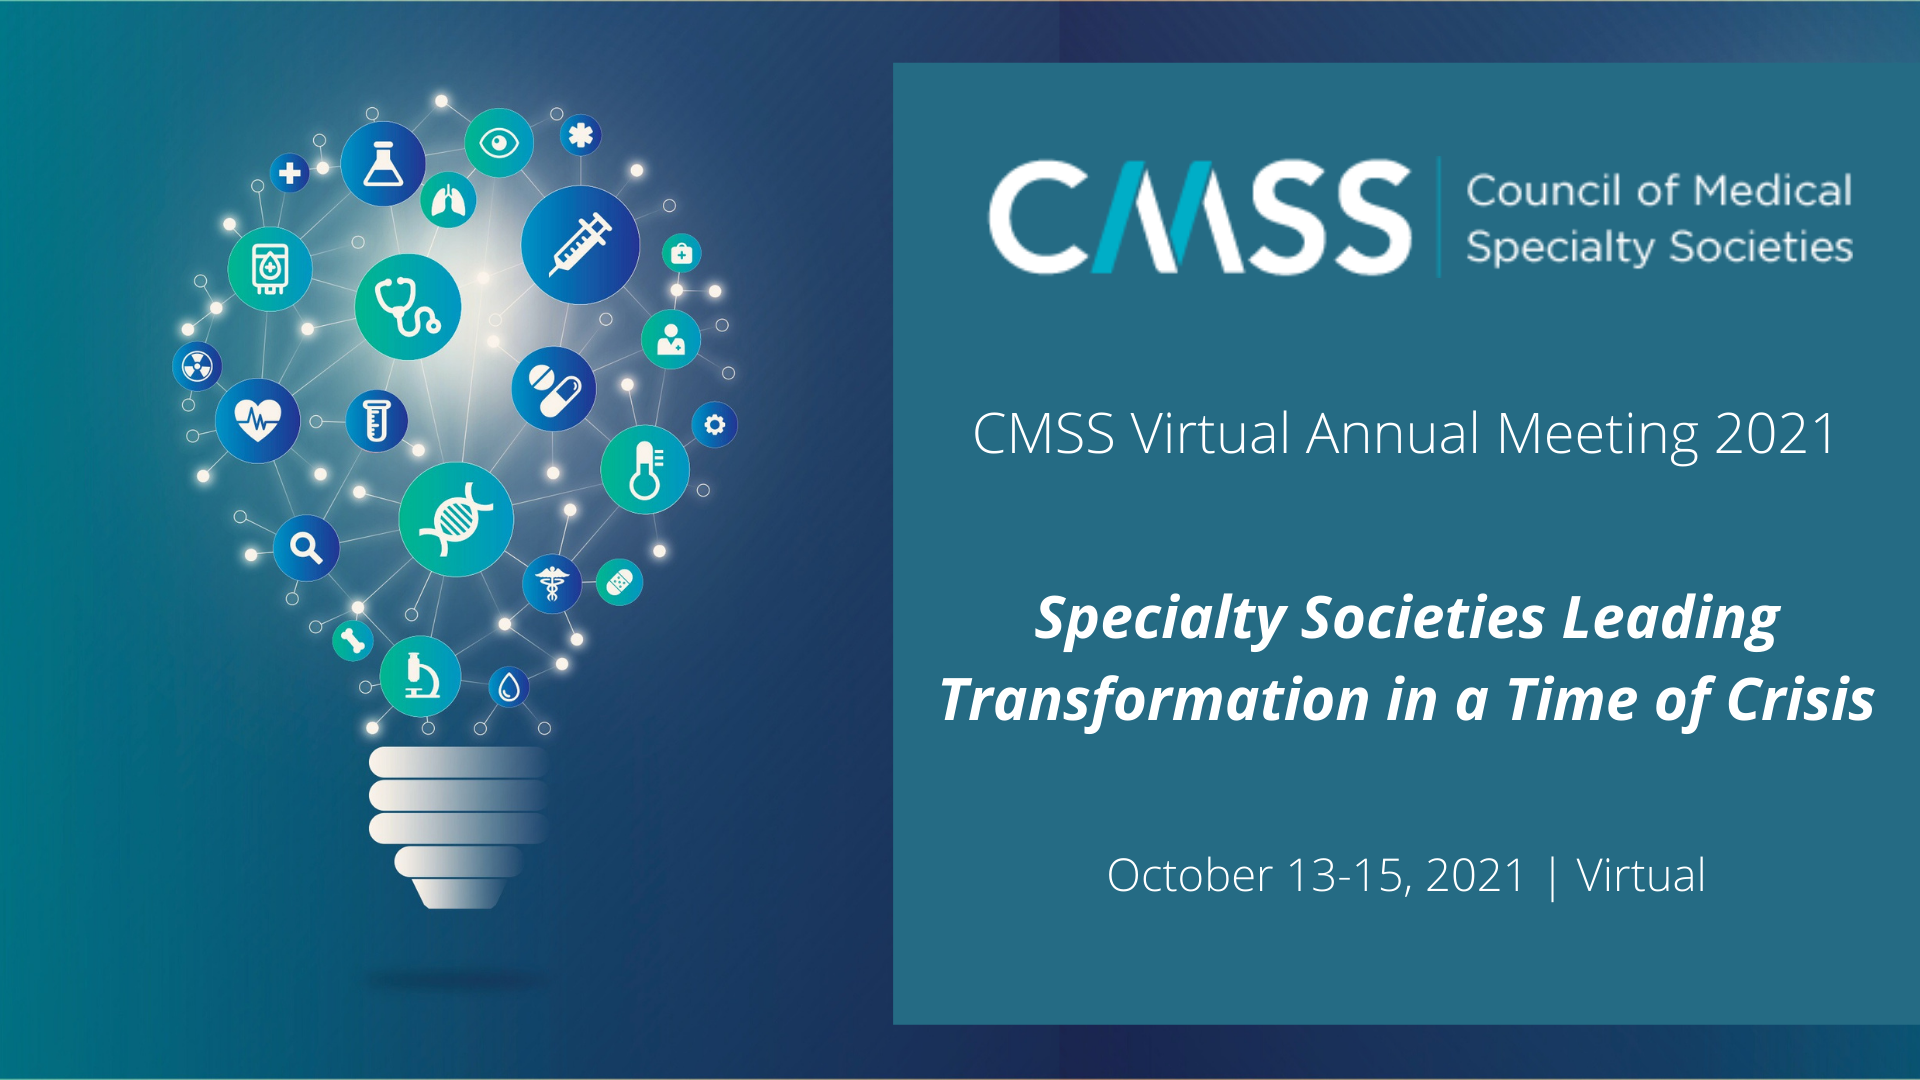 CMSS Council of Medical Specialty Societies